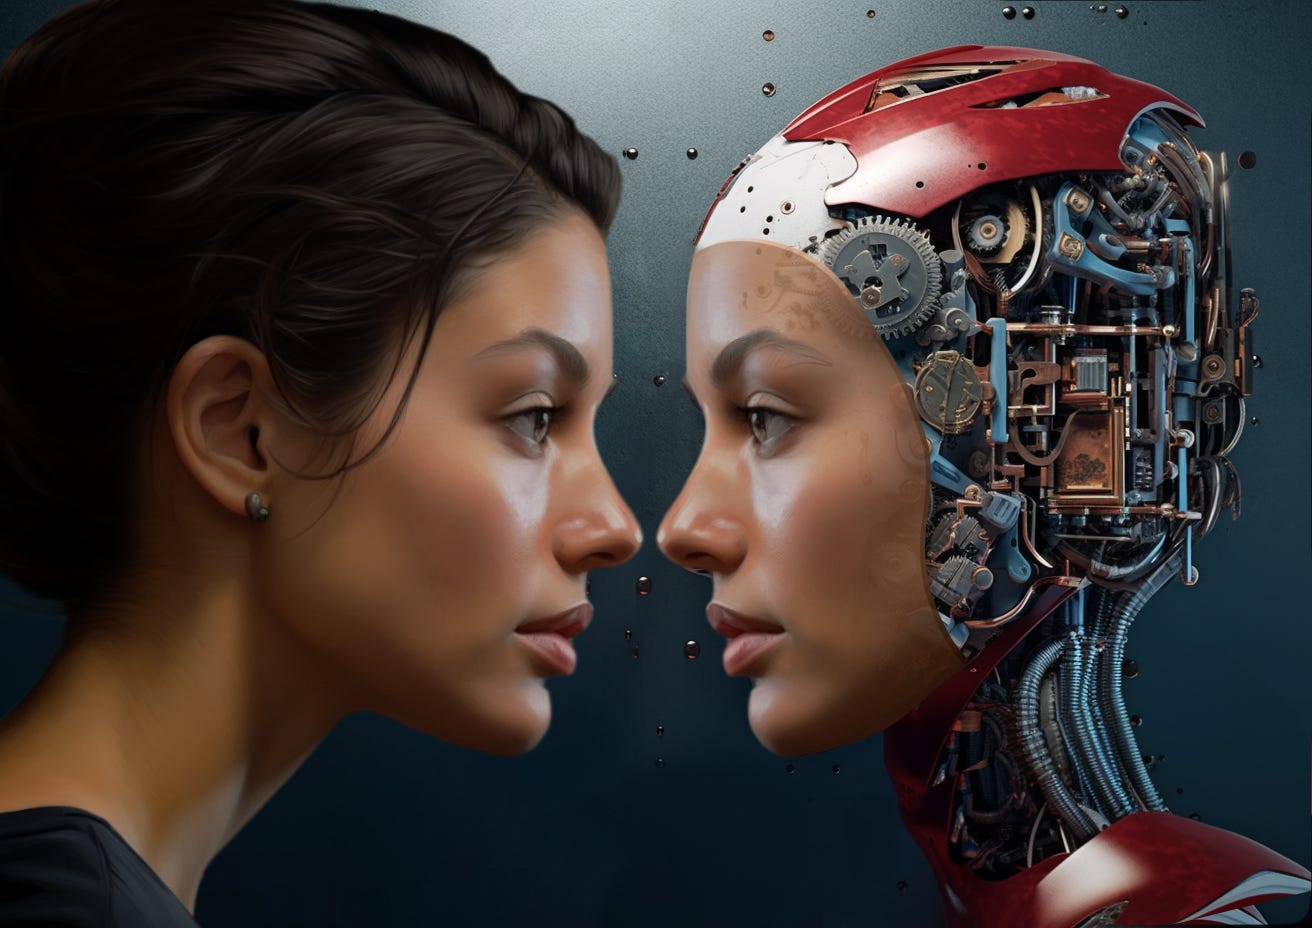 A woman in profile looking at a female look-alike robot in profile